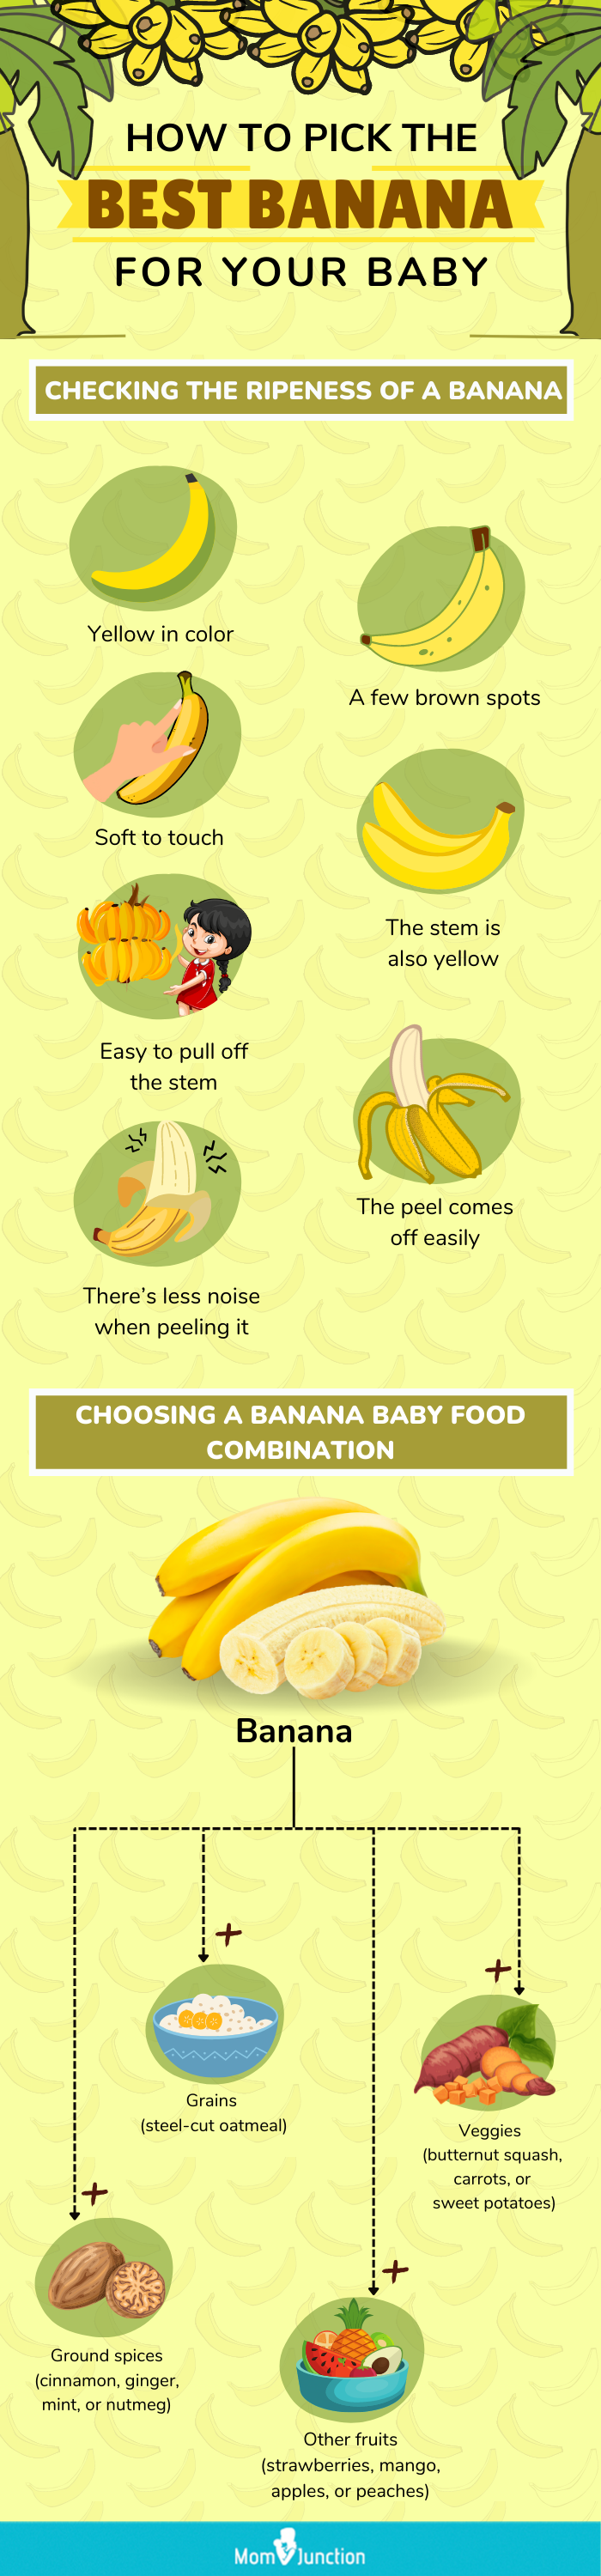 https://www.momjunction.com/wp-content/uploads/2020/10/How-To-Pick-The-Best-Banana-For-Your-Baby.png